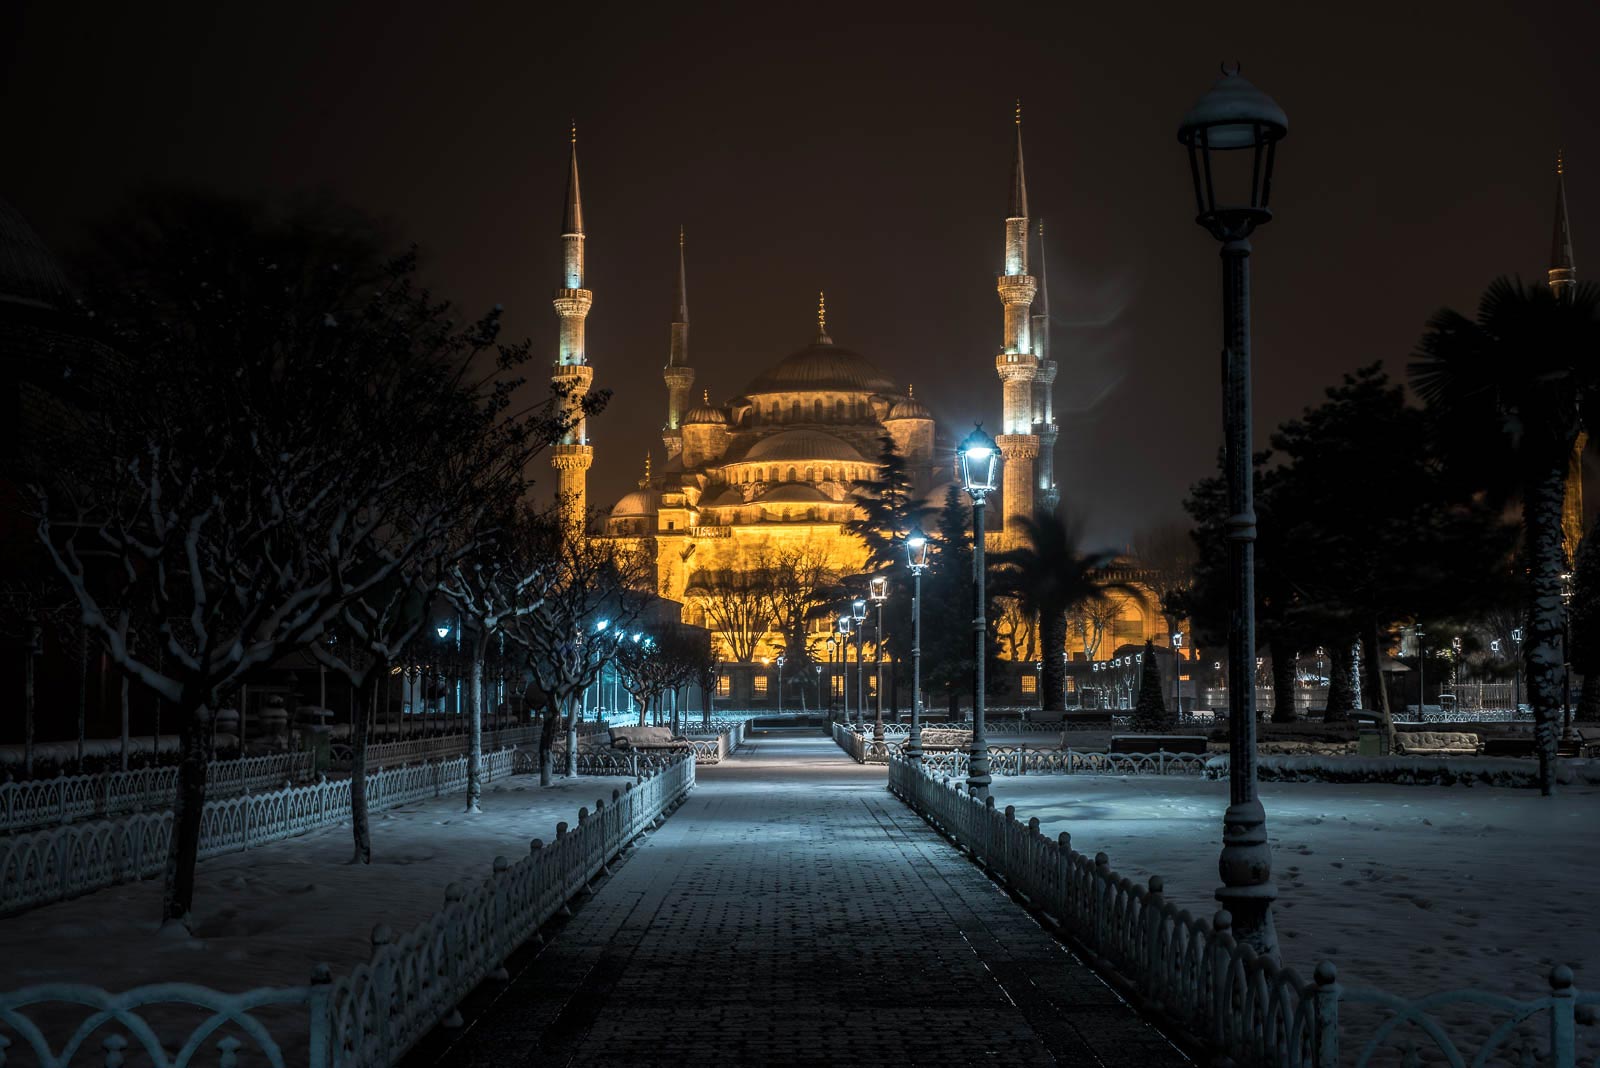 The blue mosque in istanbul at night.